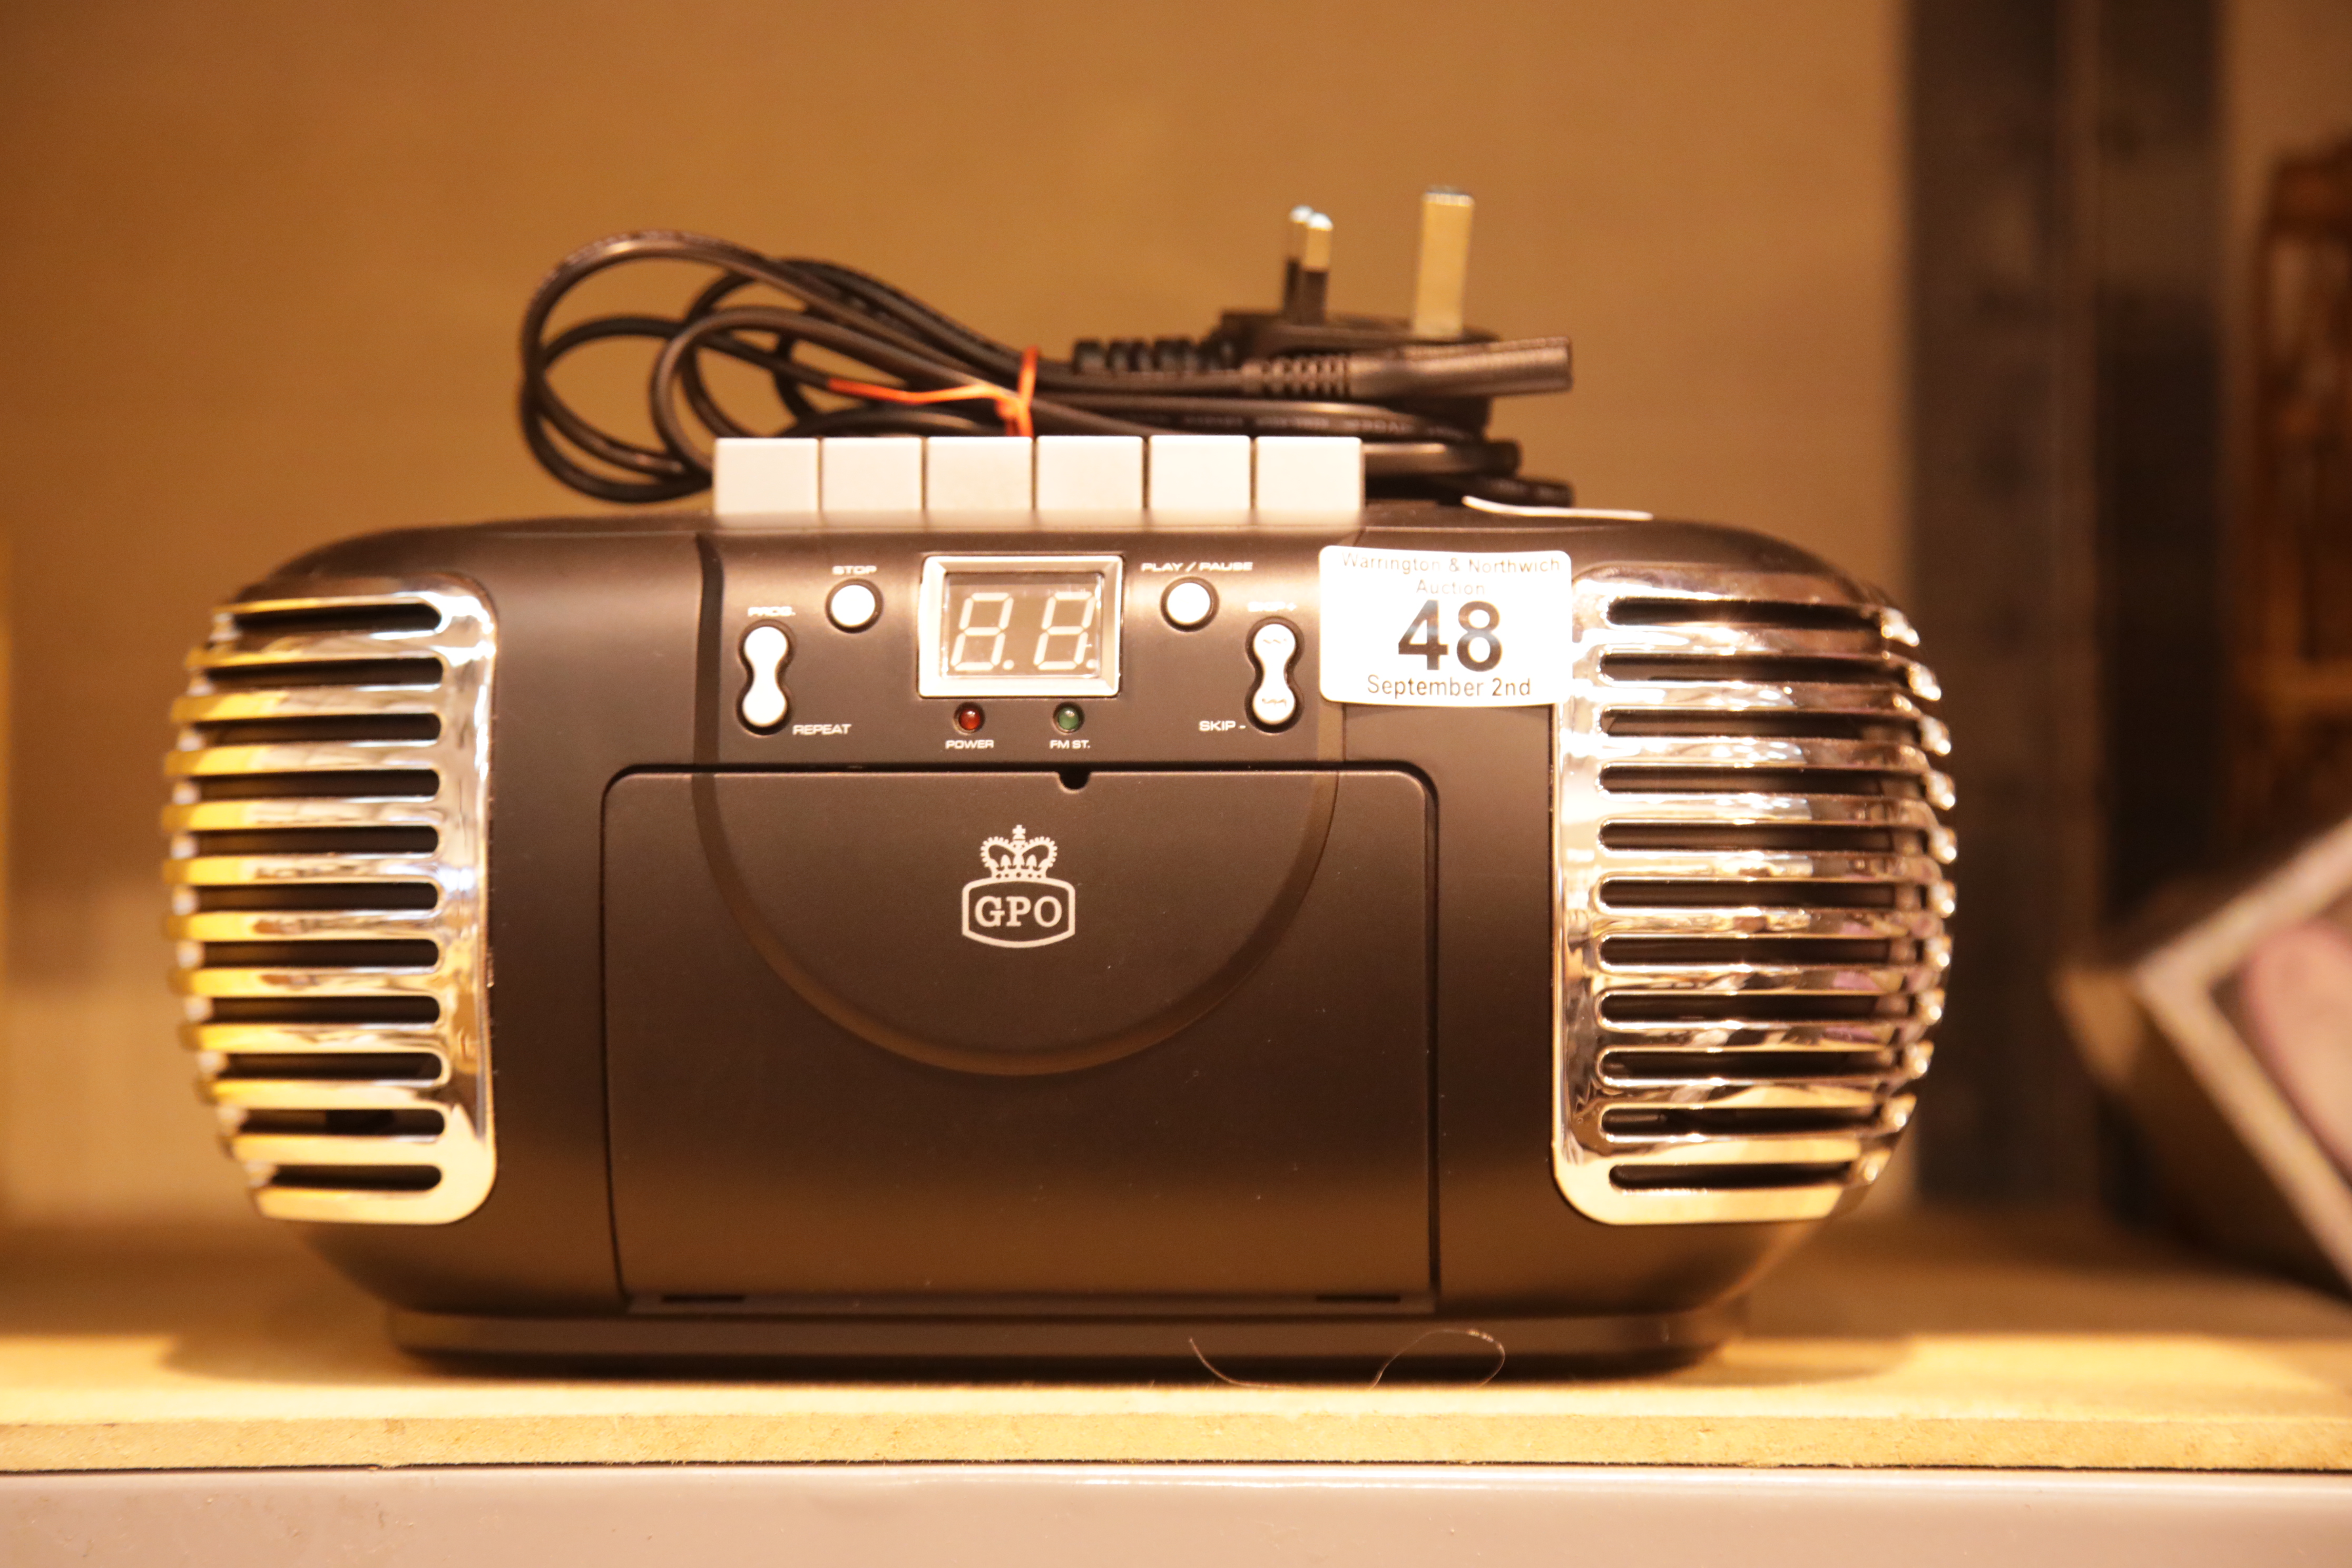 Black GPO PCD299 3 in 1 FM/AM radio, CD and cassette player. Not available for in-house P&P.